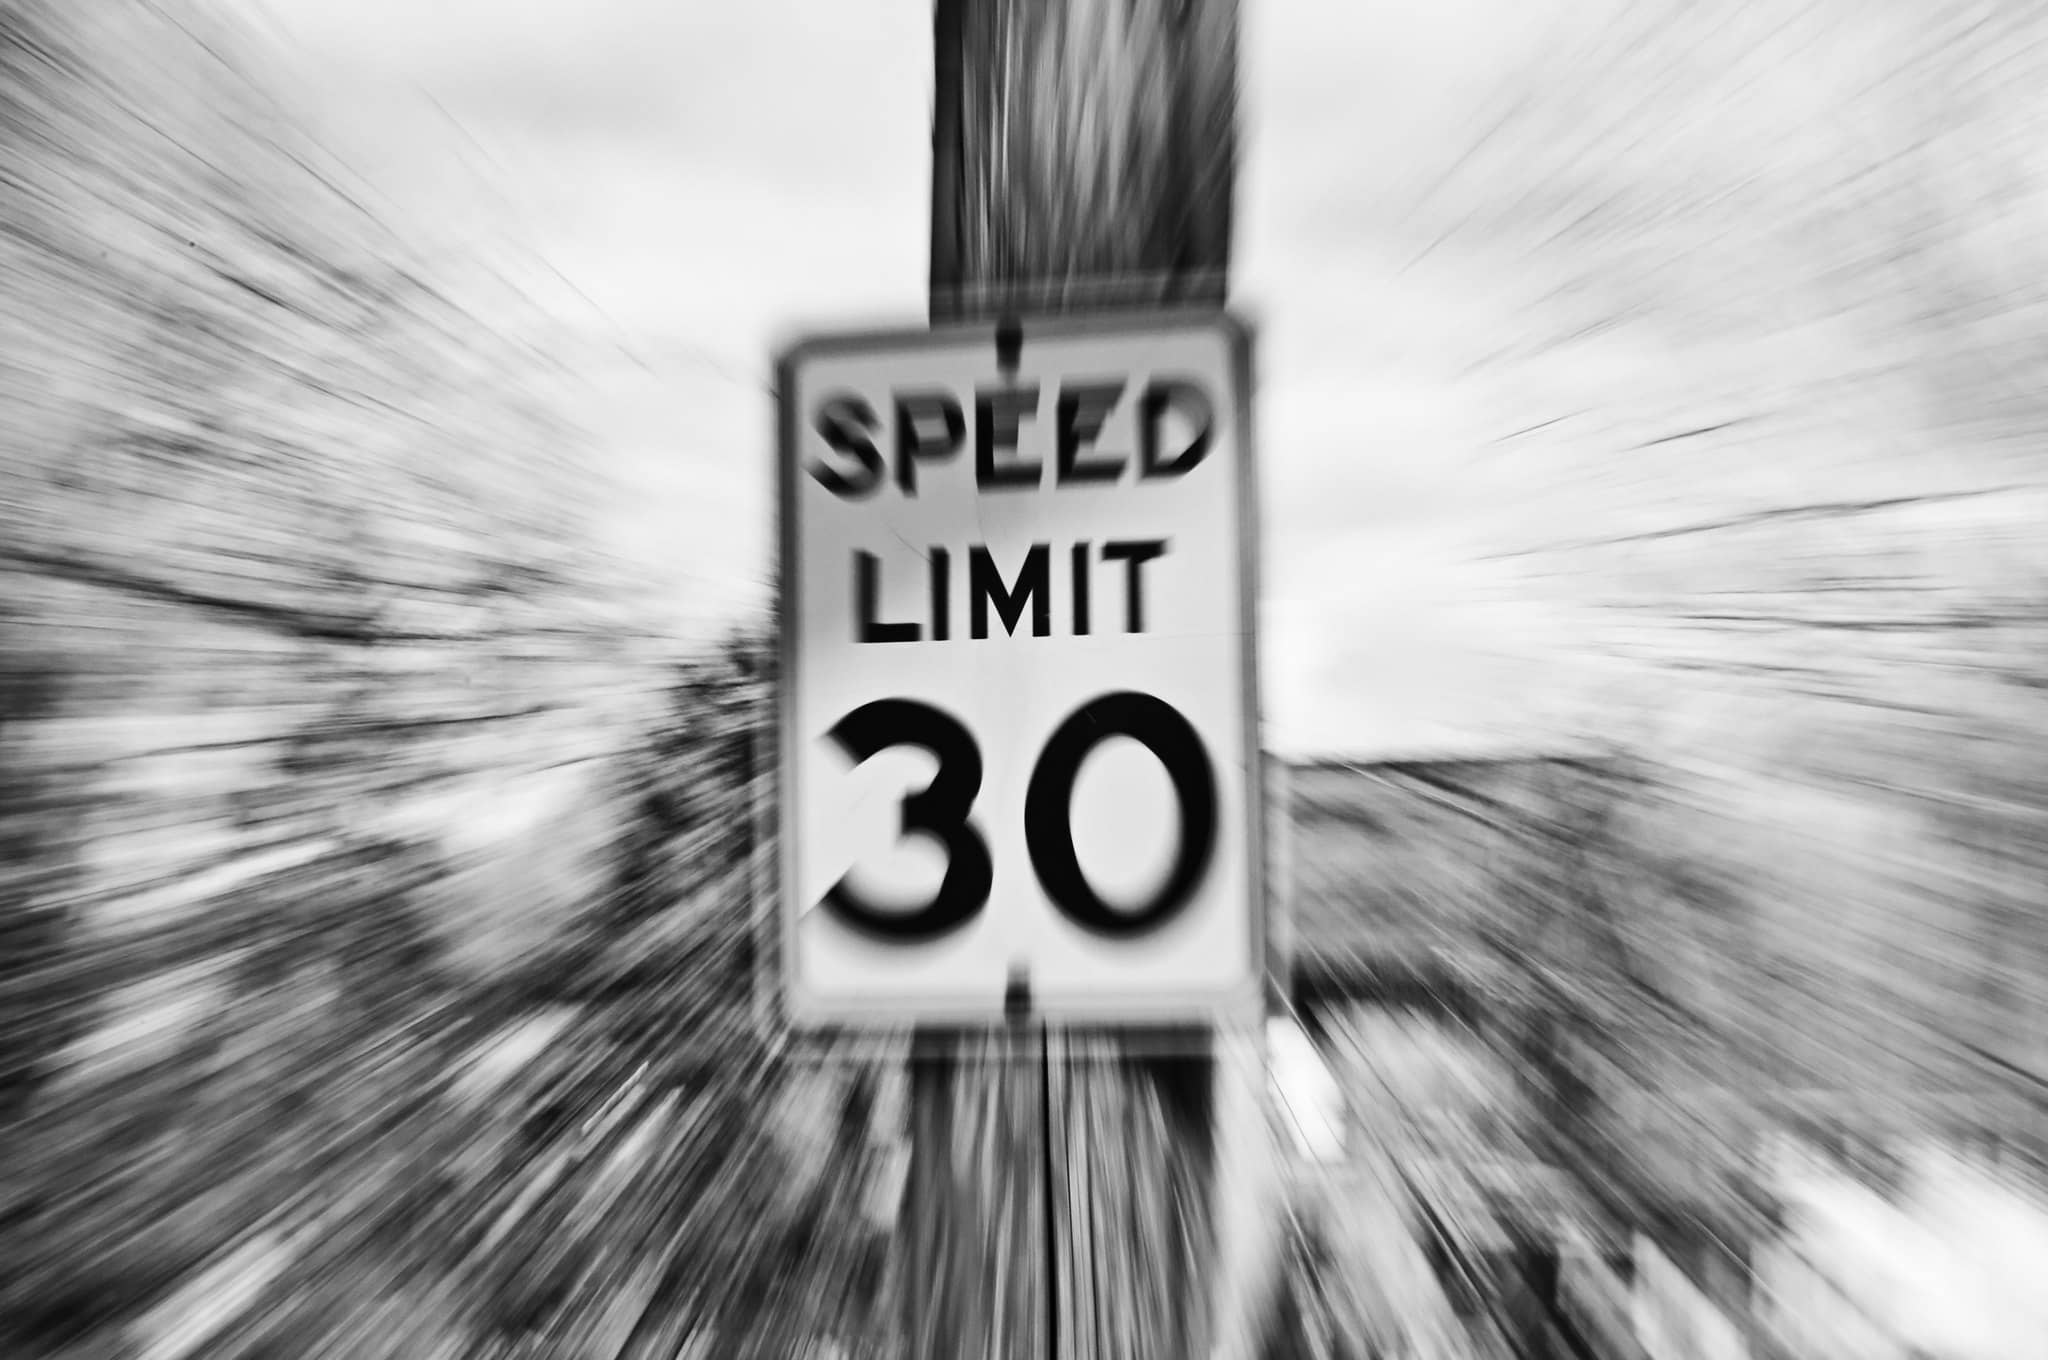 30mph speed limit road sign